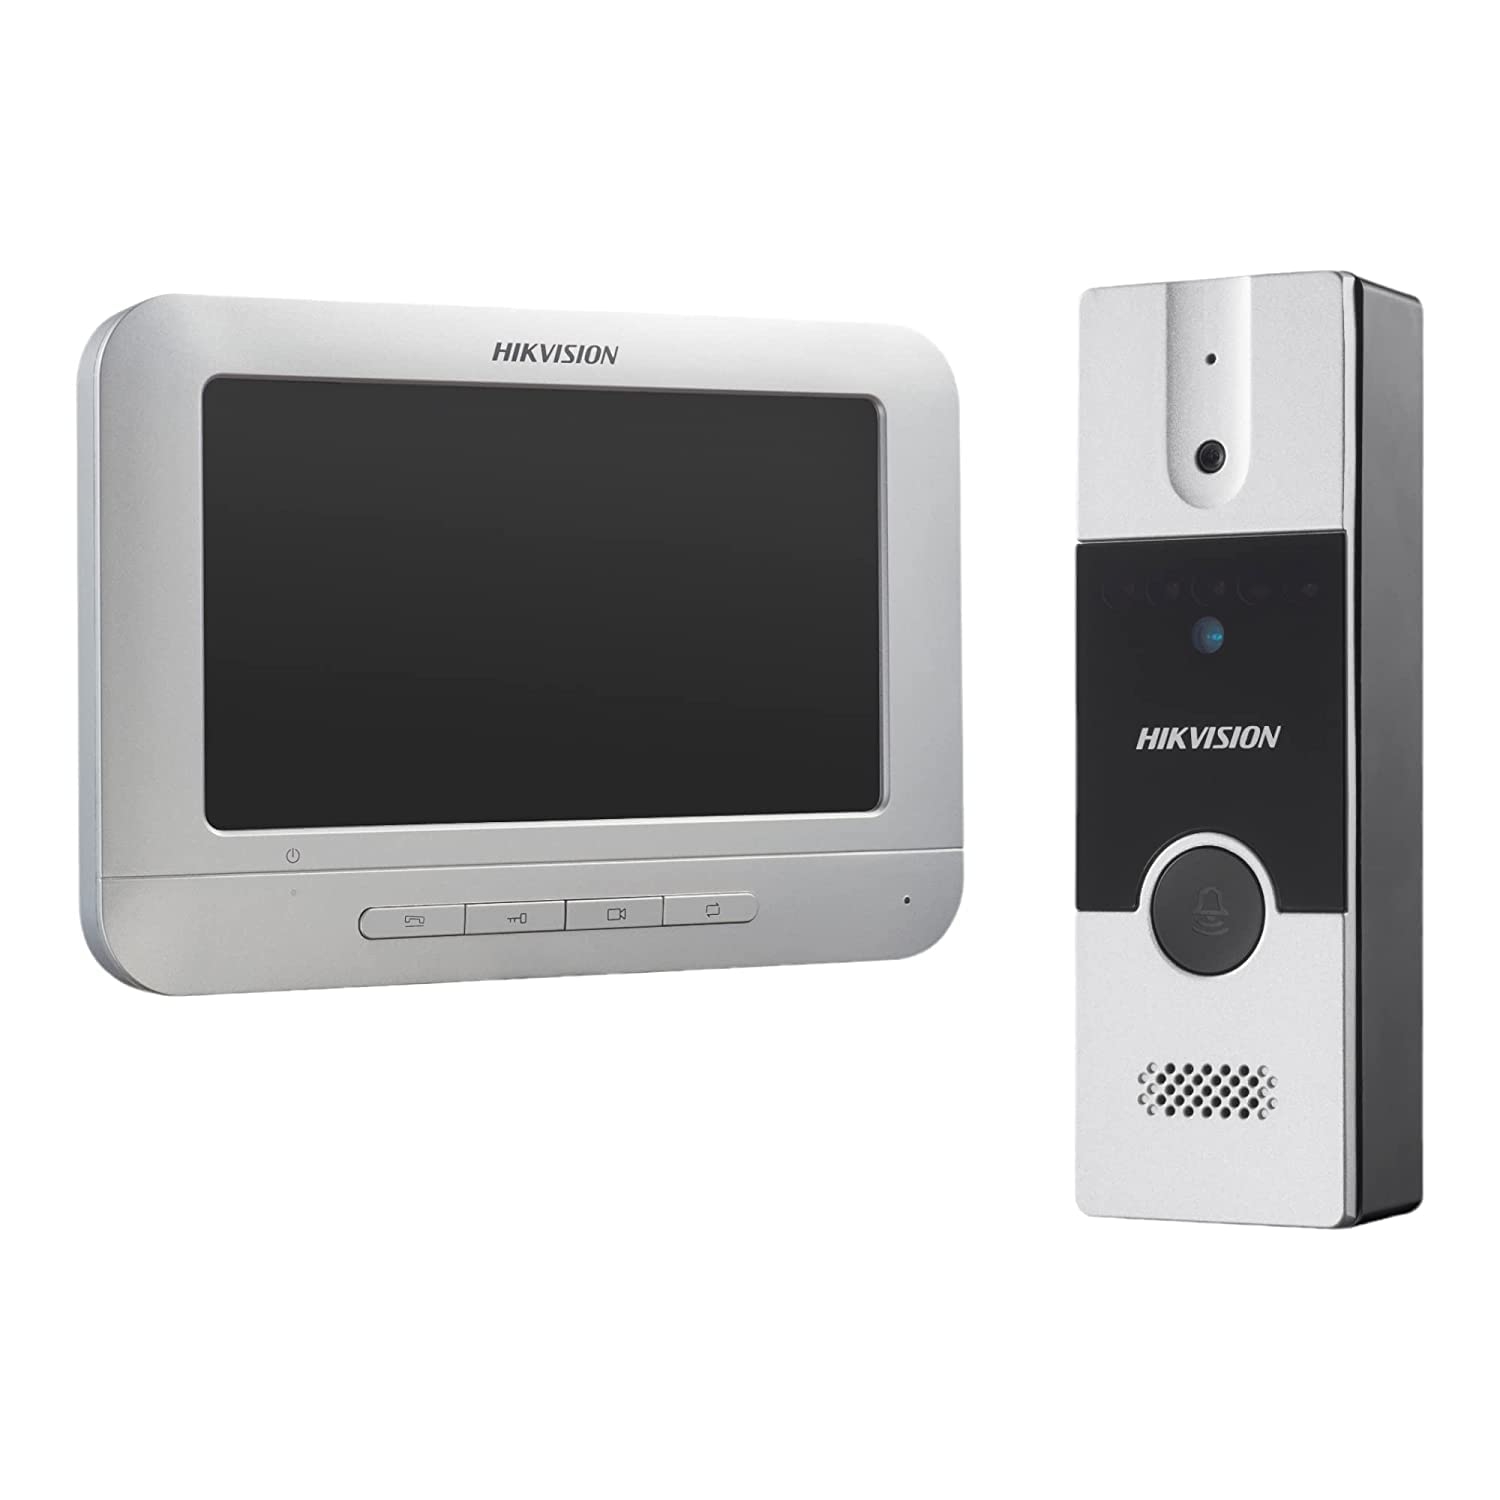 HIKVISION Analog Video Door Phone/Bell 7 TFT LCD Screen | One Call Button | BuiltIn Mic & Loudspeaker (DS-KIS204T)